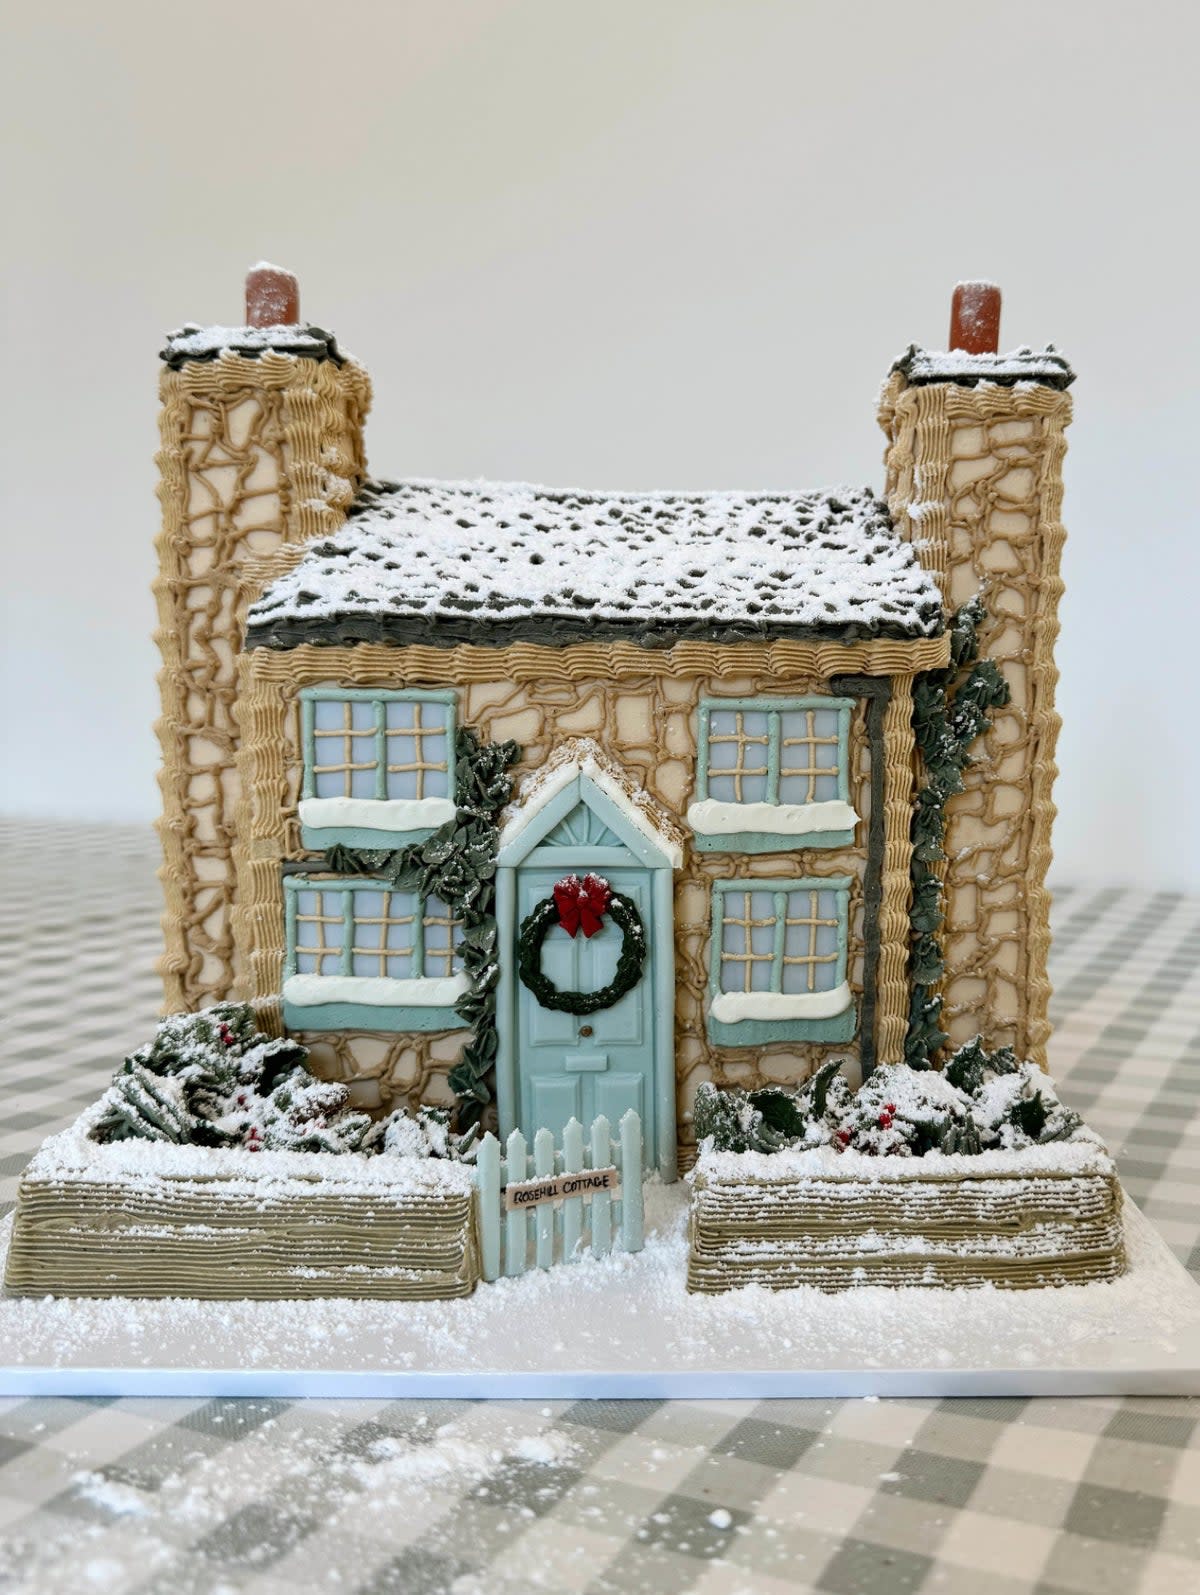 The cake made to look like the house in The Holiday (PA)